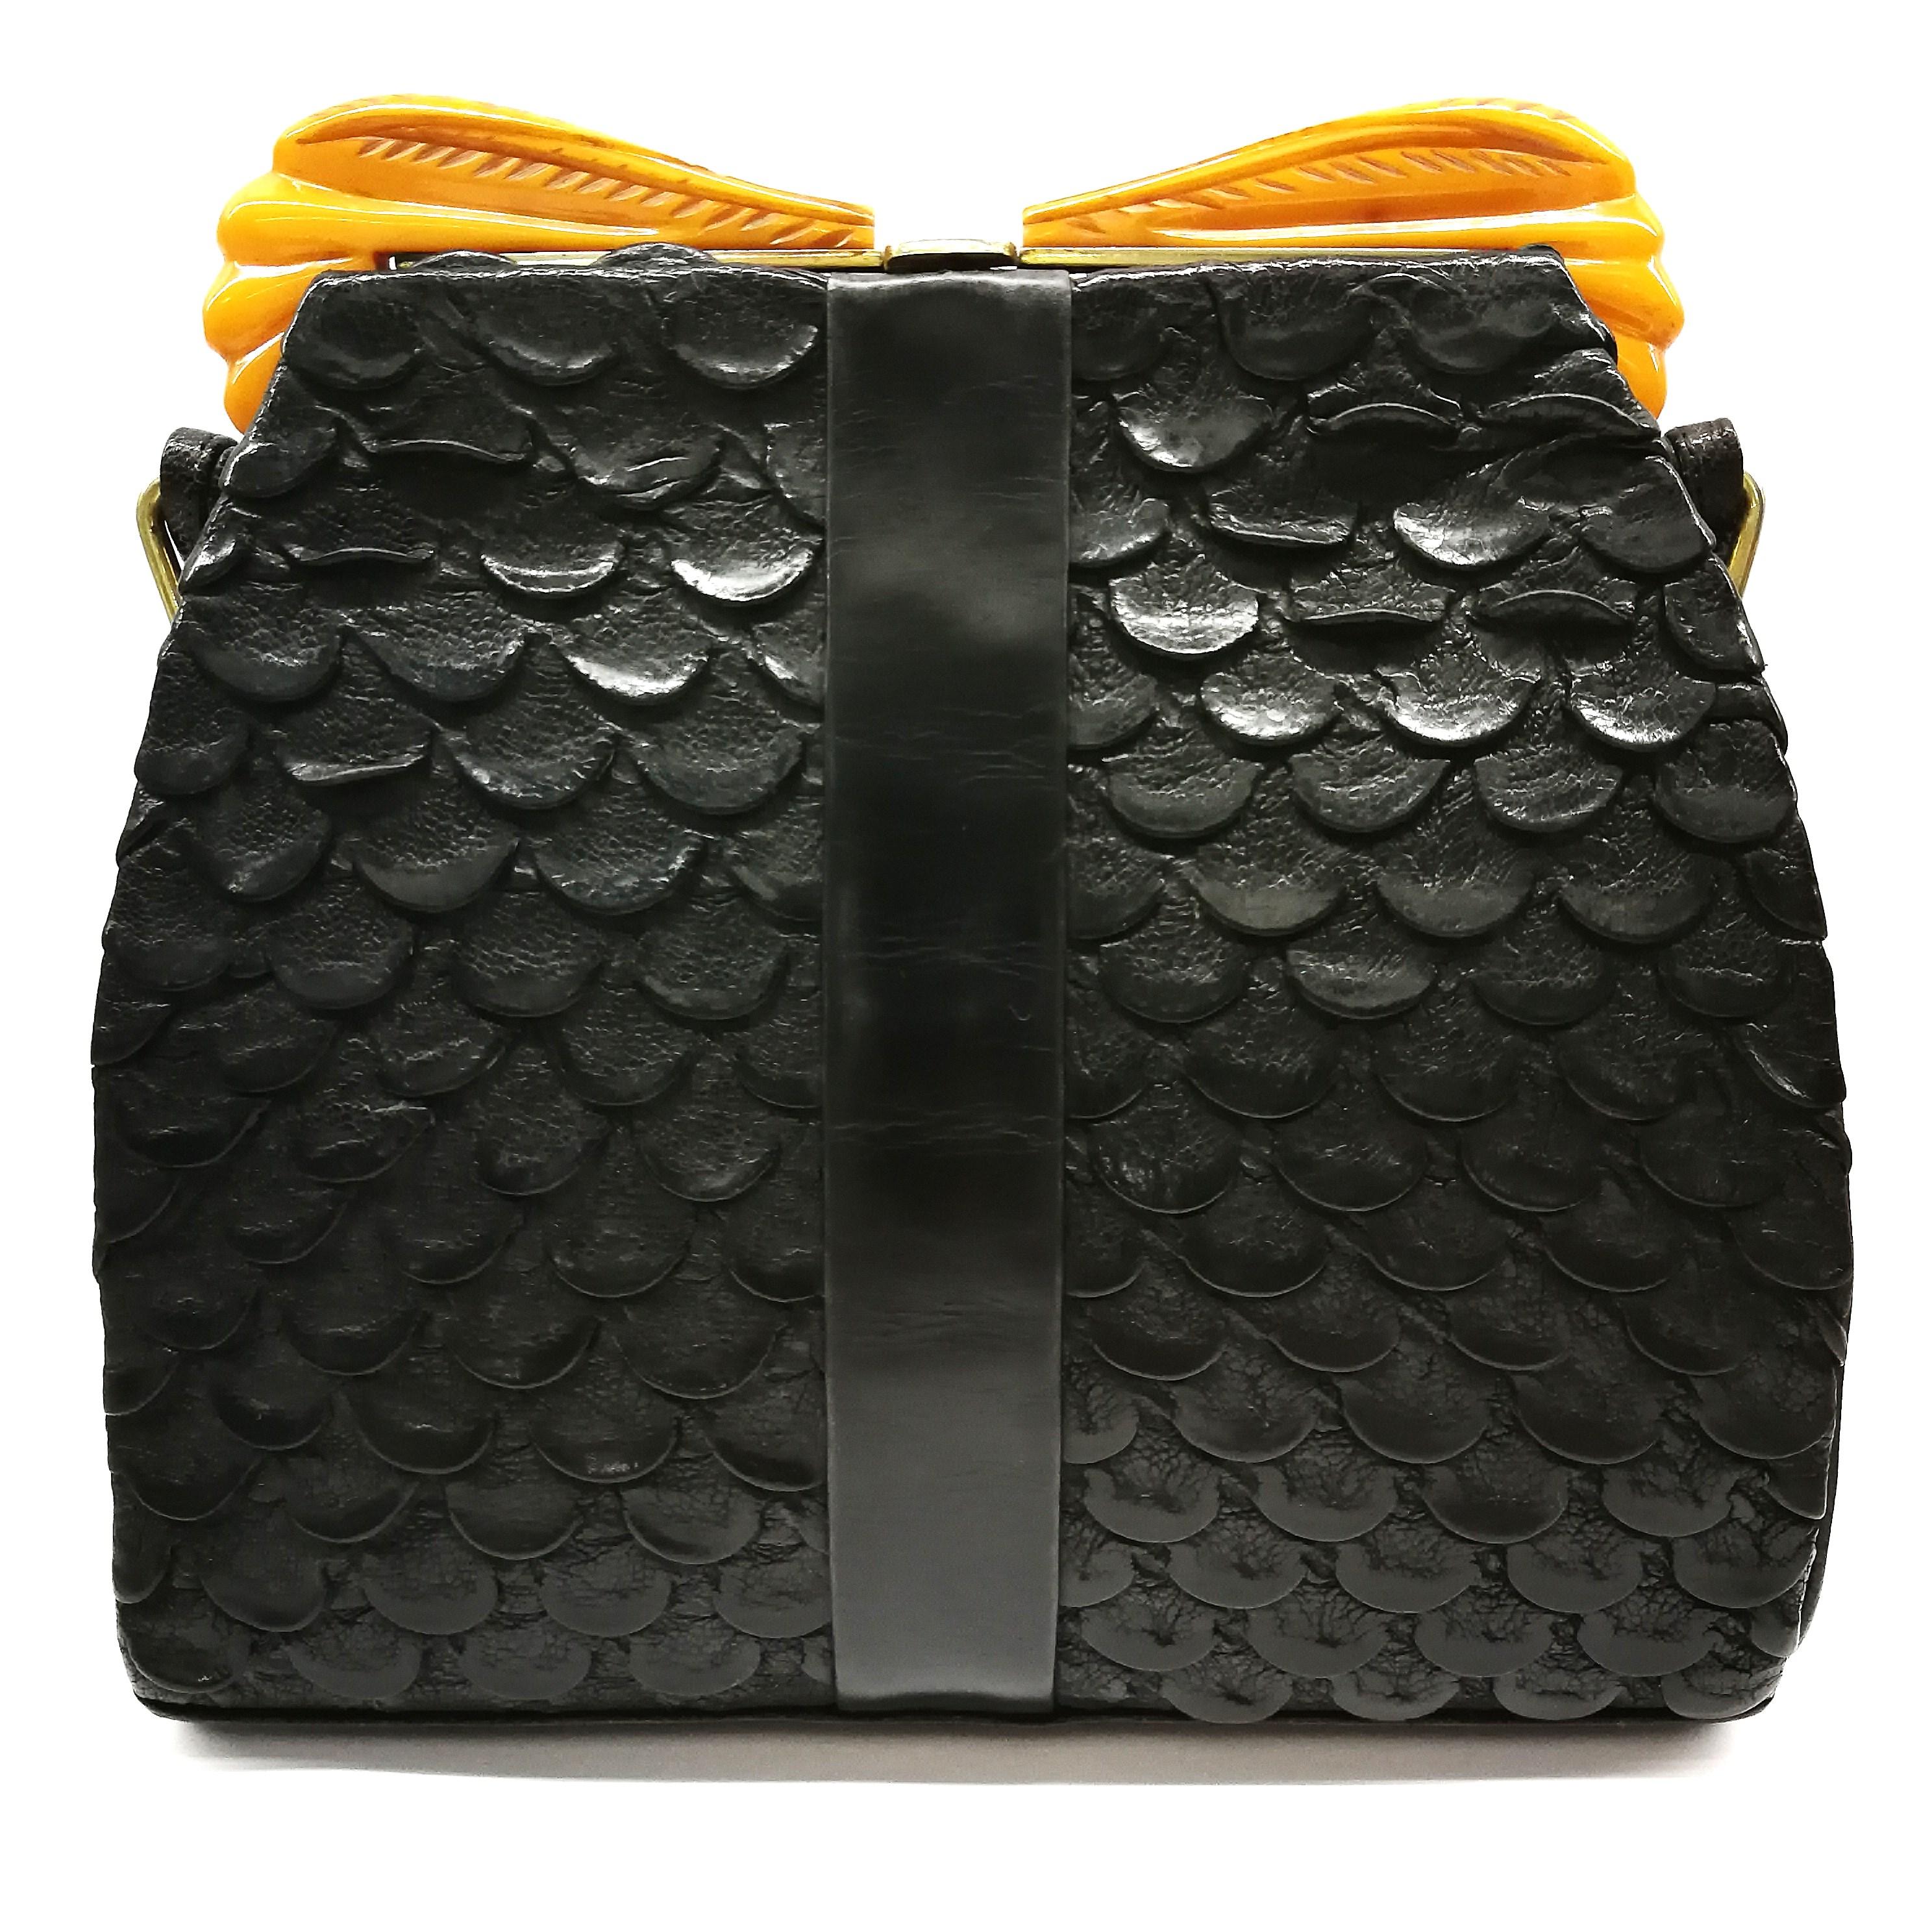 A rare and very individual thing, this 1930s handbag is composed of a very unusual leather, most decorative. Crowned with beautifully carved opaque amber Bakelite 'wings', the combination of the black and highly textured leather and the carved